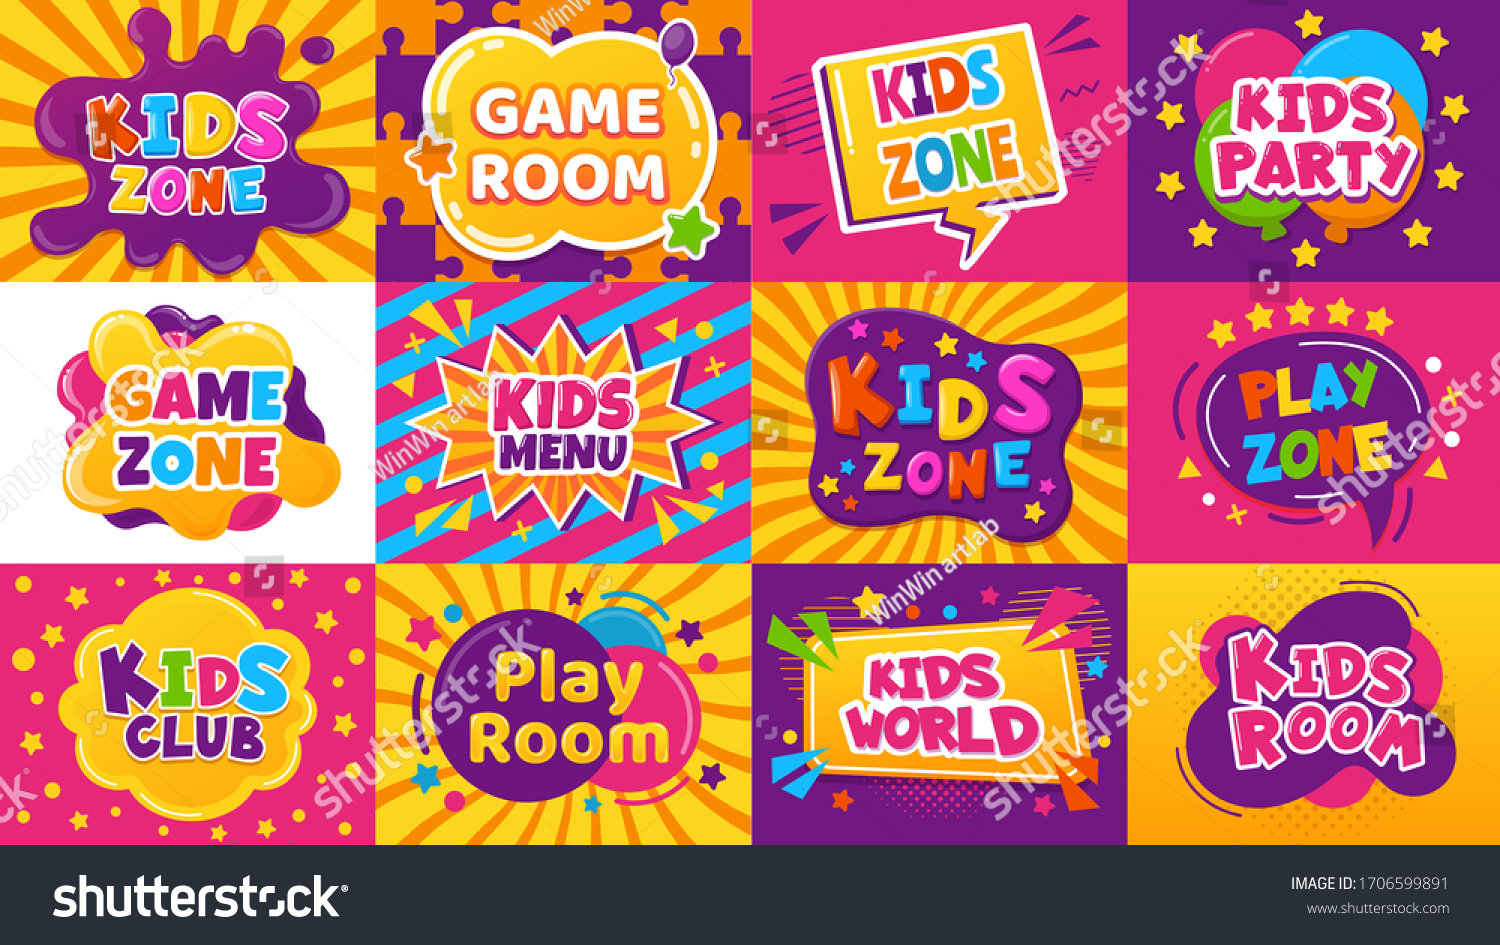 Kids game zone banner. Children game party posters, kid play area, entertainment, education room. Baby playground posters vector illustration set. Kid area for game play, menu for childen emblem #1706599891